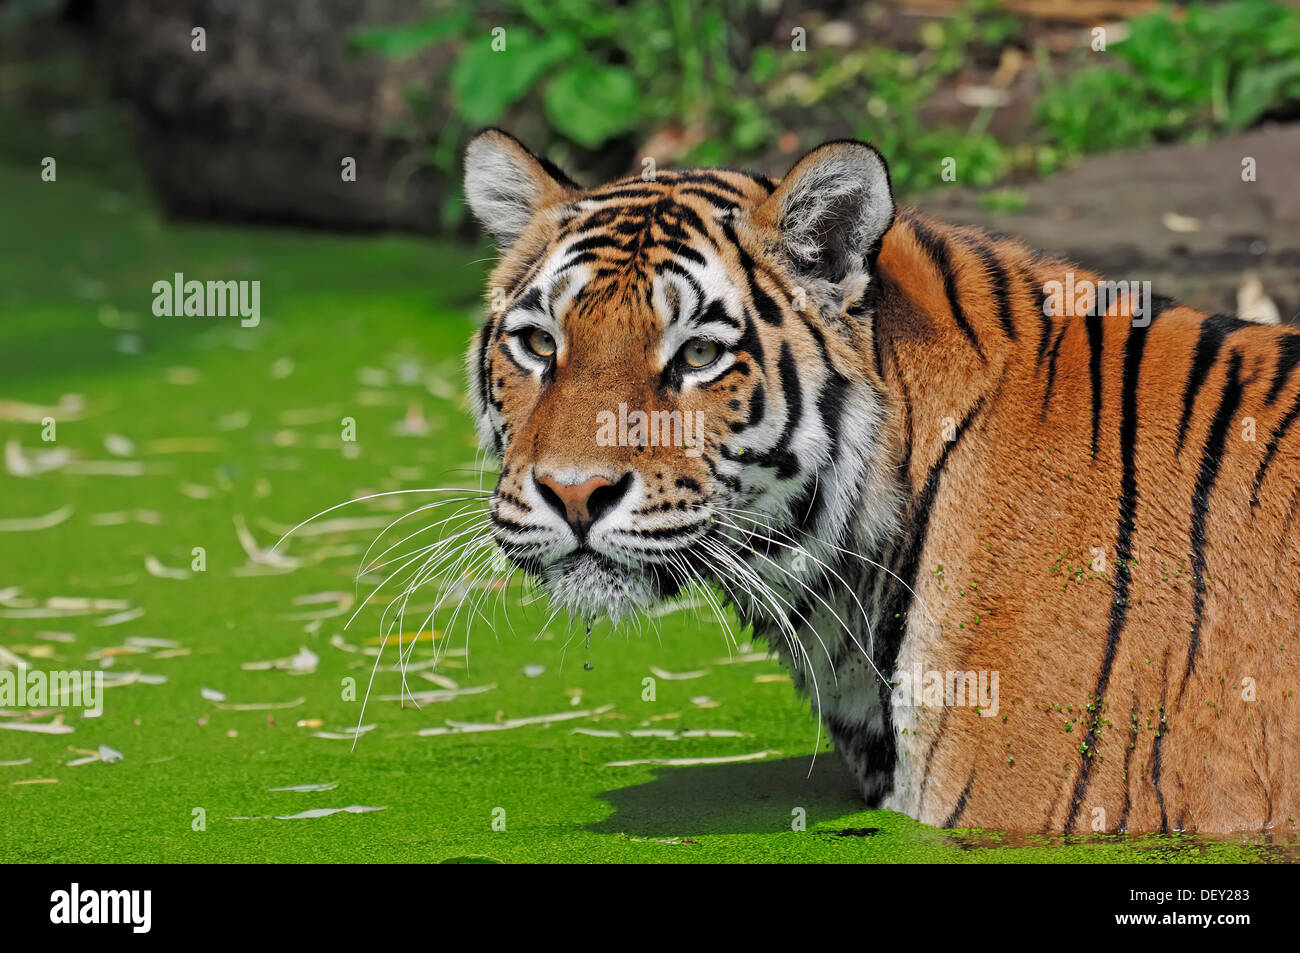 Siberian Tiger or Amur tiger (Panthera tigris altaica) in the water, native to Asia, in captivity, Netherlands, Europe Stock Photo